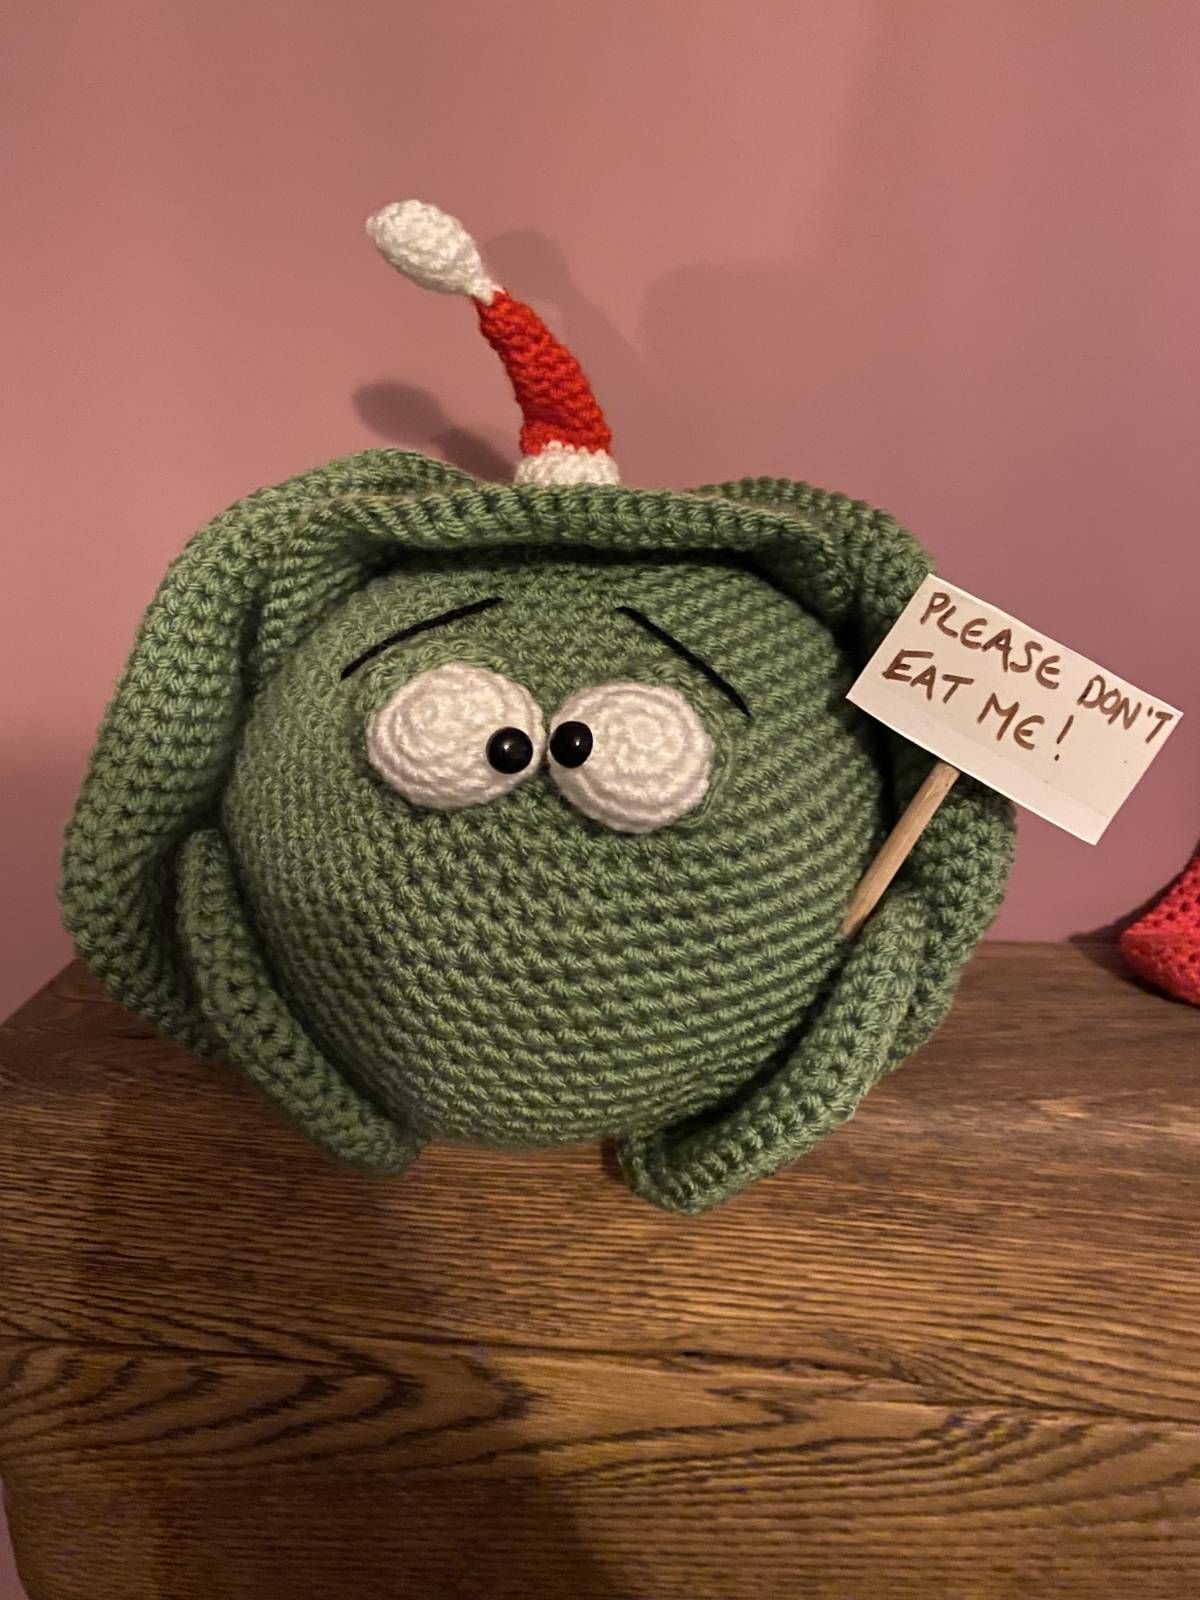 Brussels Sprout Christmas Crochet Pattern Review By Vicky for Cottontail Whiskers